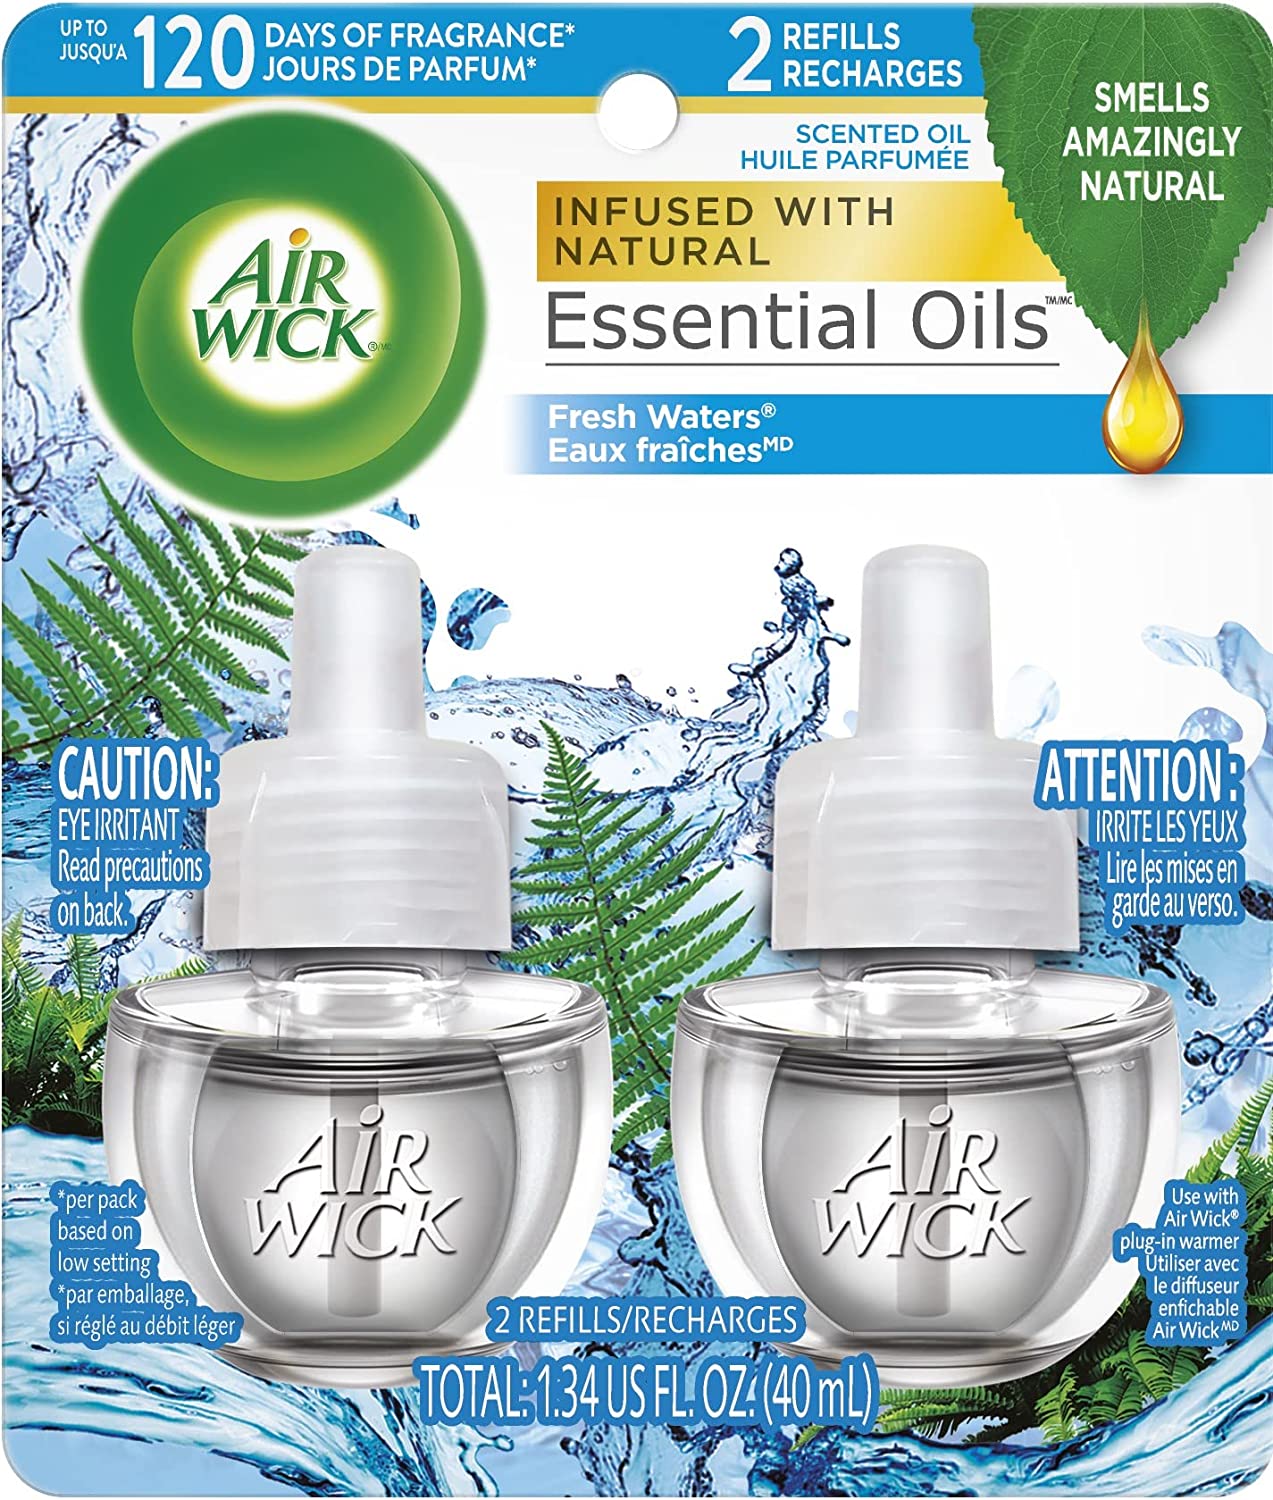 AIR WICK SCENTED OIL 2PK REFILL FRESH WATERS 6/1.34oz